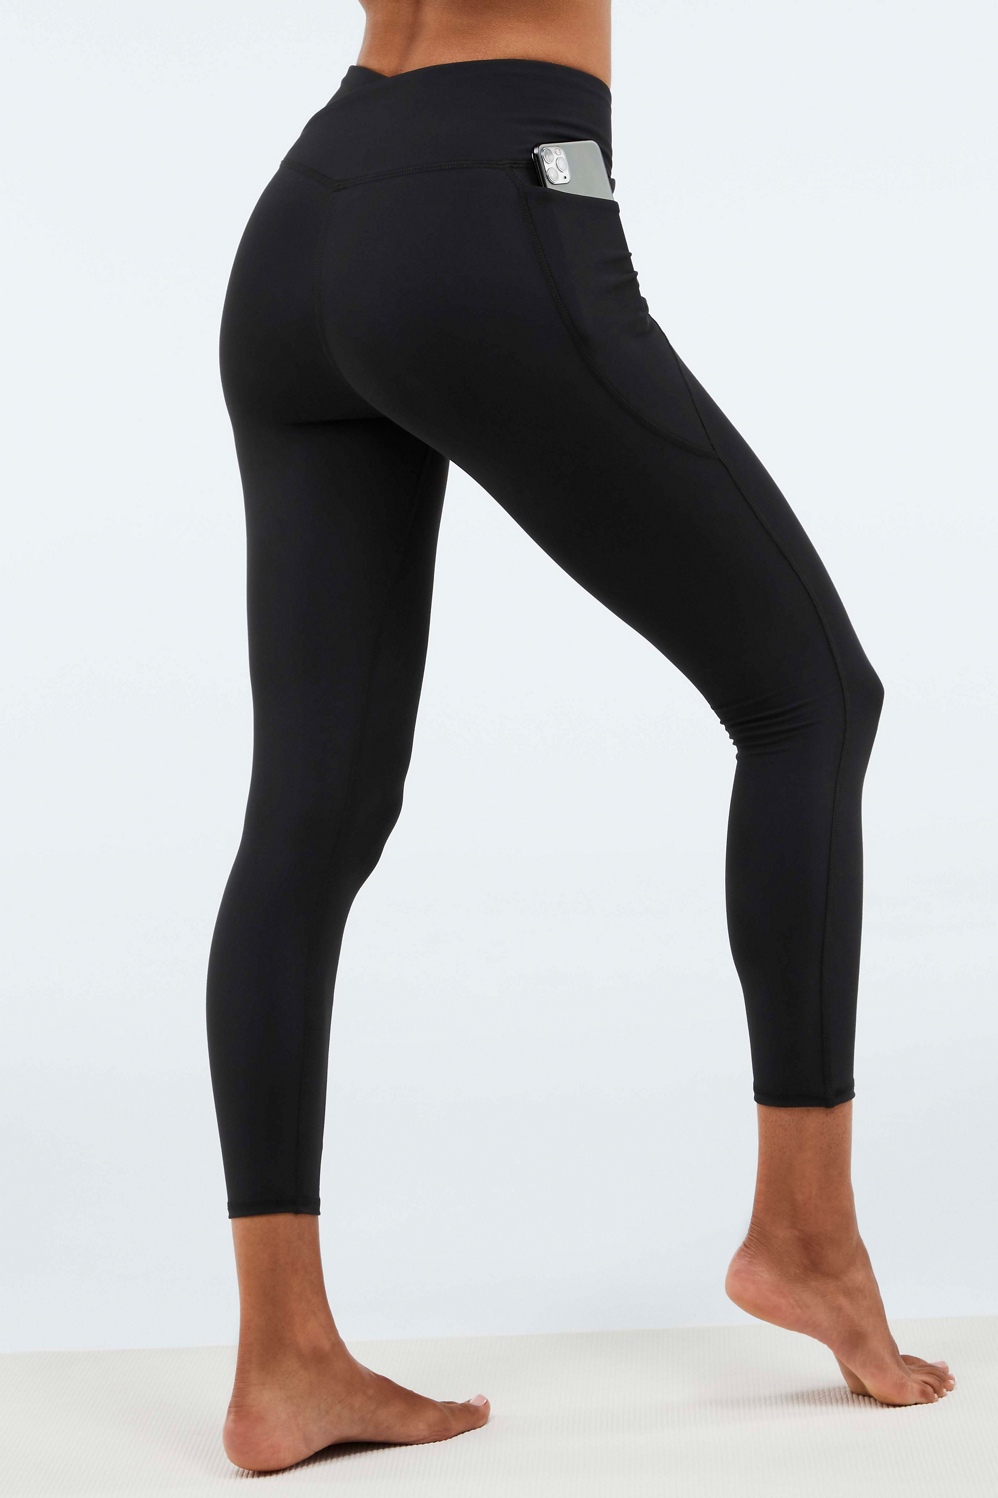 Fabletics Pure Luxe Leggings Athletic Pants Black Side Pockets Plus Size 2X  NEW - $48 New With Tags - From Kaliq